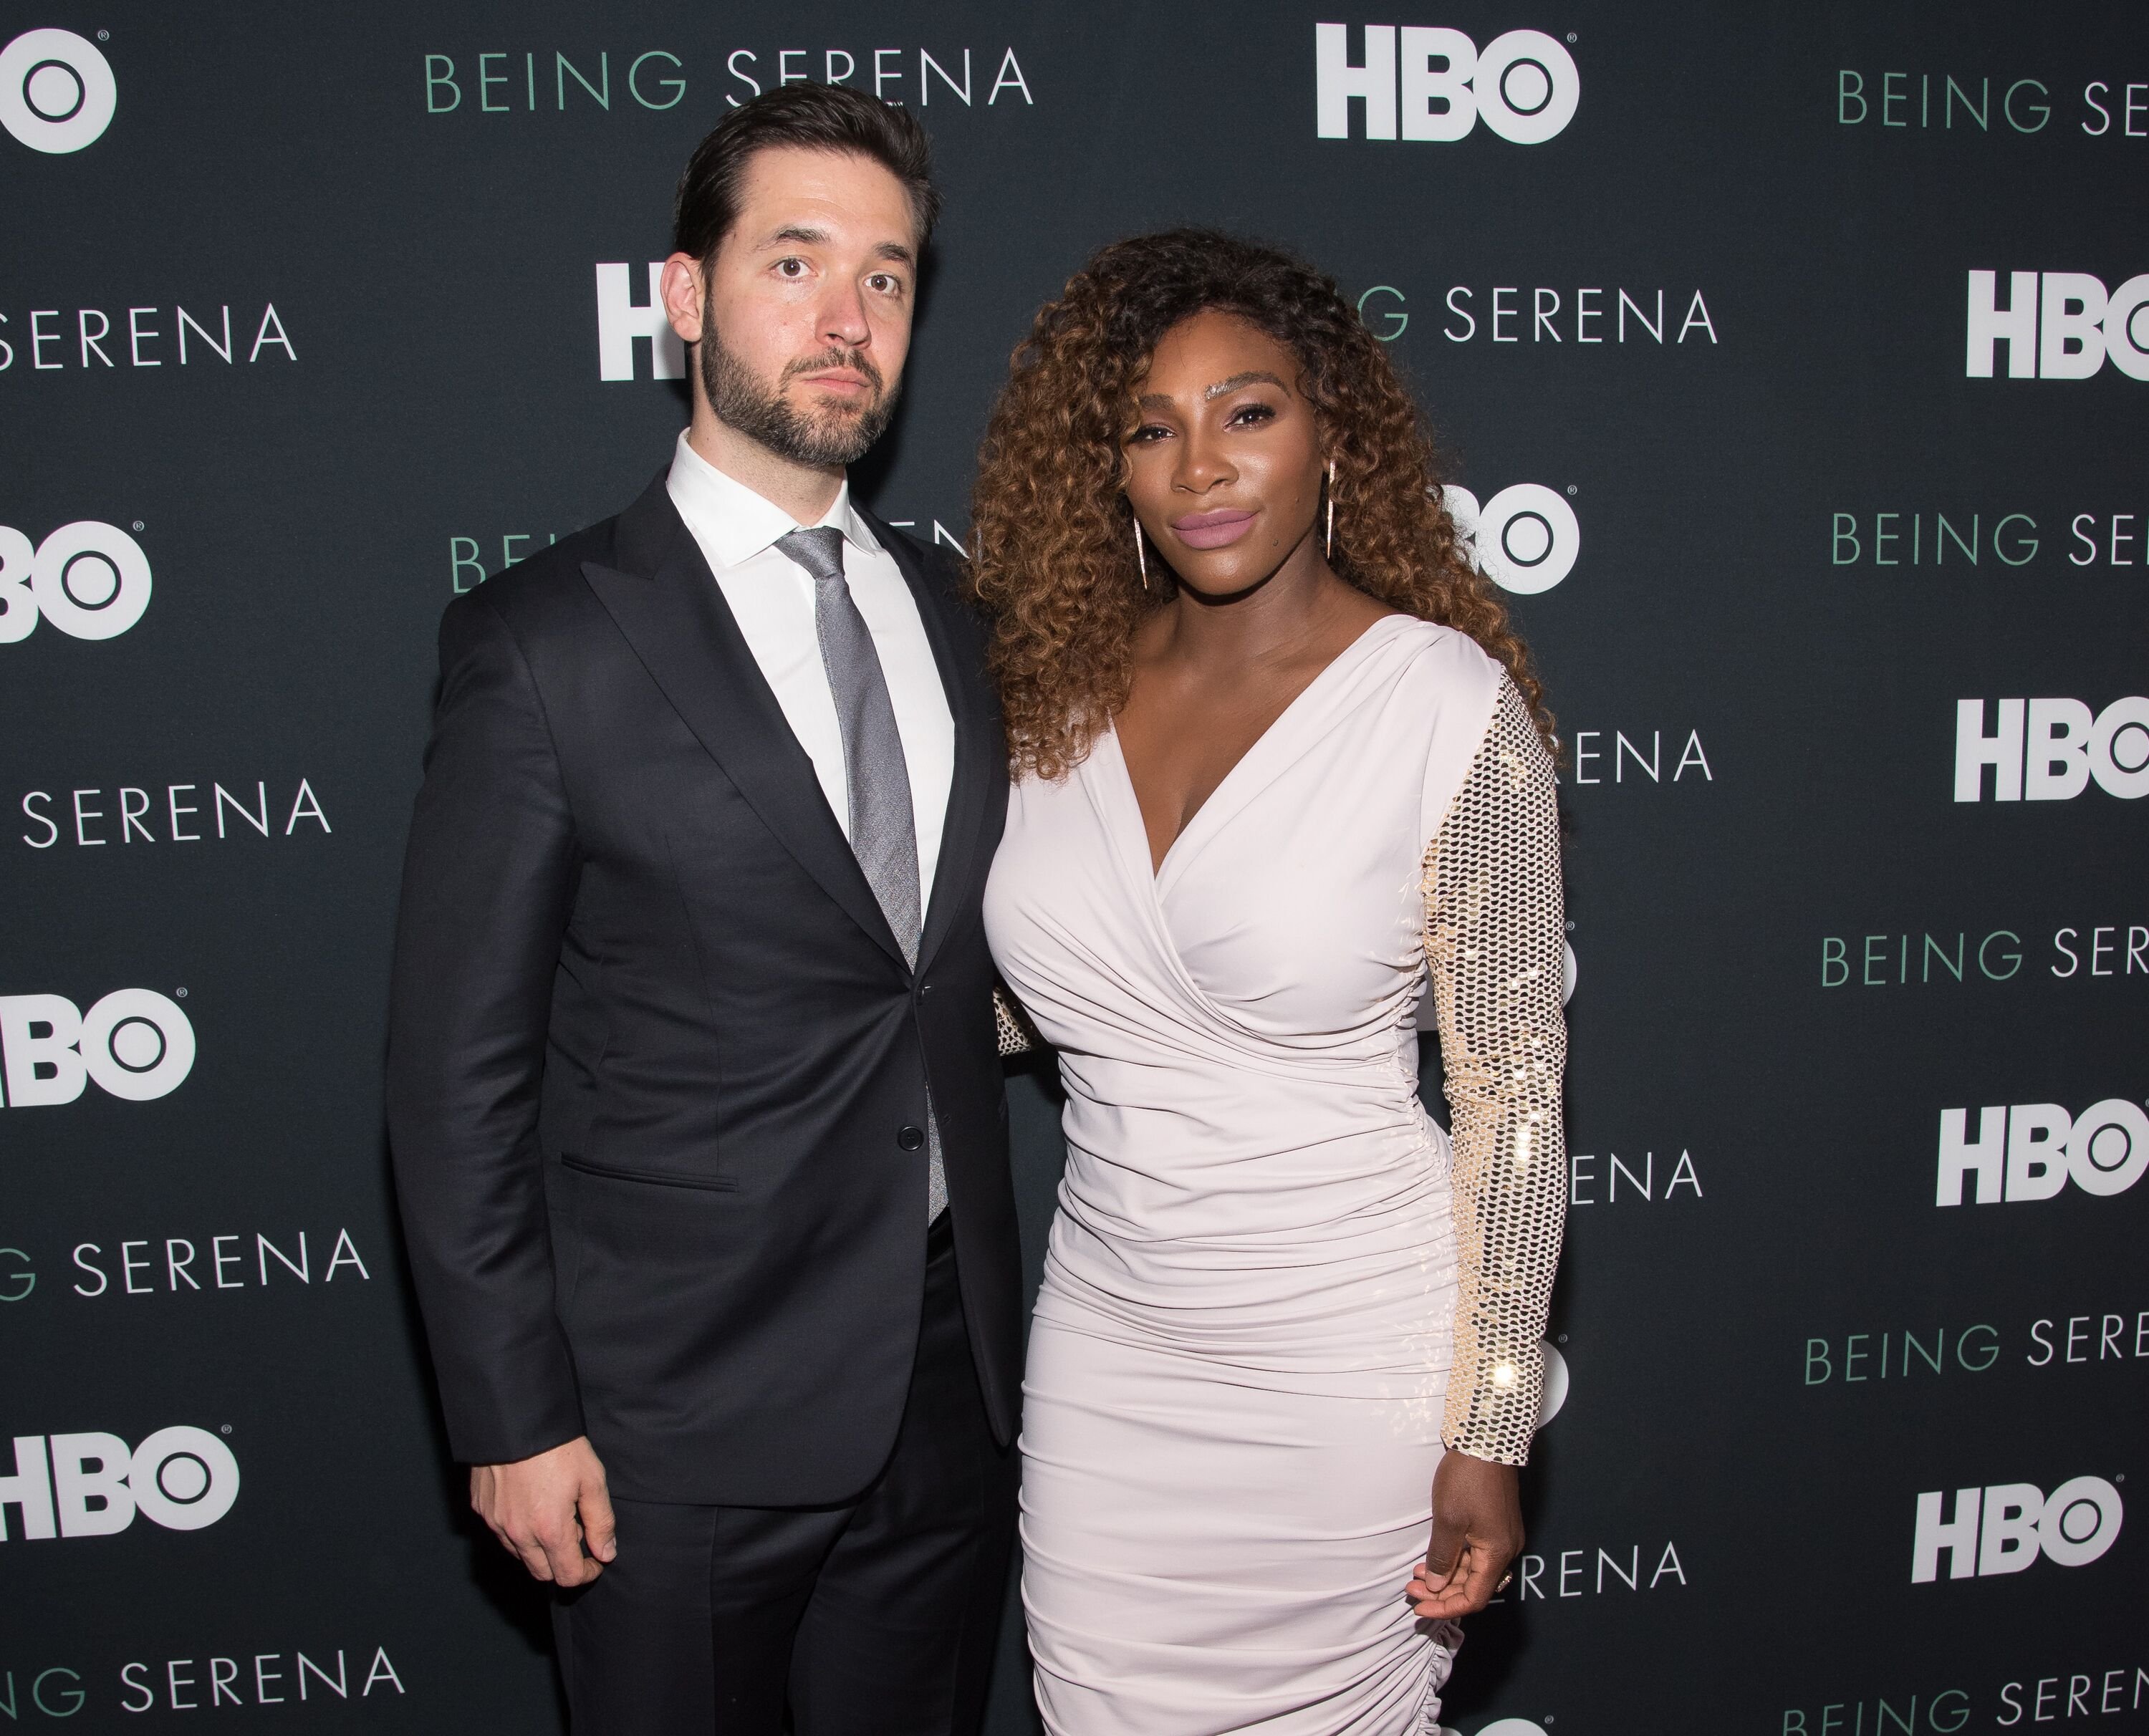 Serena Williams and Alexis Ohanian attend the "Being Serena" New York Premiere on April 25, 2018 in New York City | Photo: Getty Images 